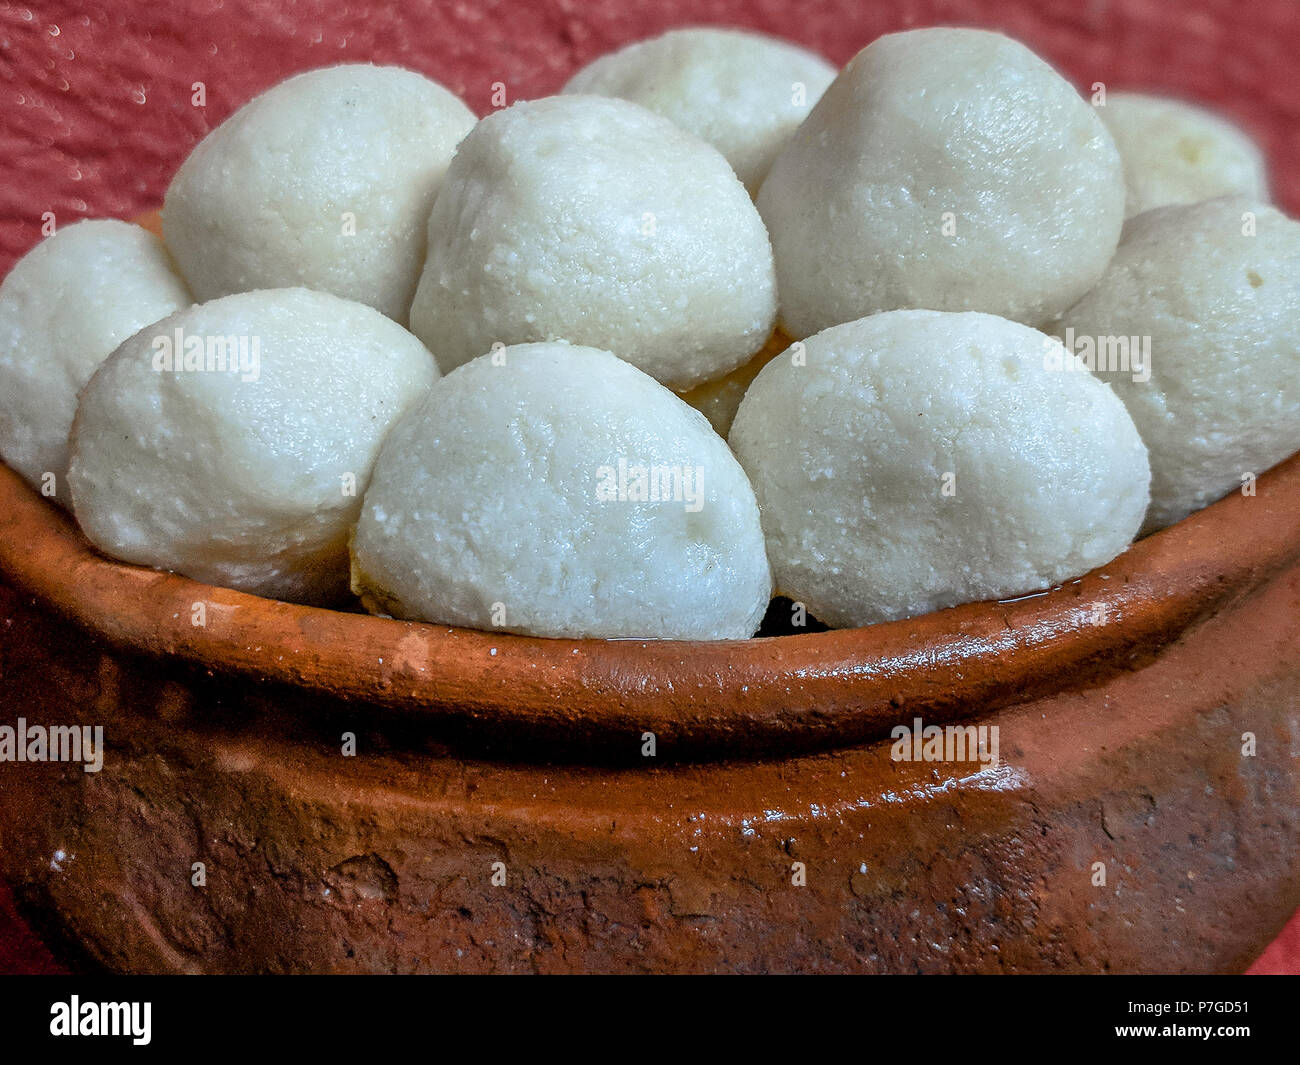 Indian Sweet Rasgulla Also Know as Rosogolla, Roshogolla, Rasagola, Ras Gulla is a Syrupy Dessert Popular in India. Selective focuse is used. Stock Photo